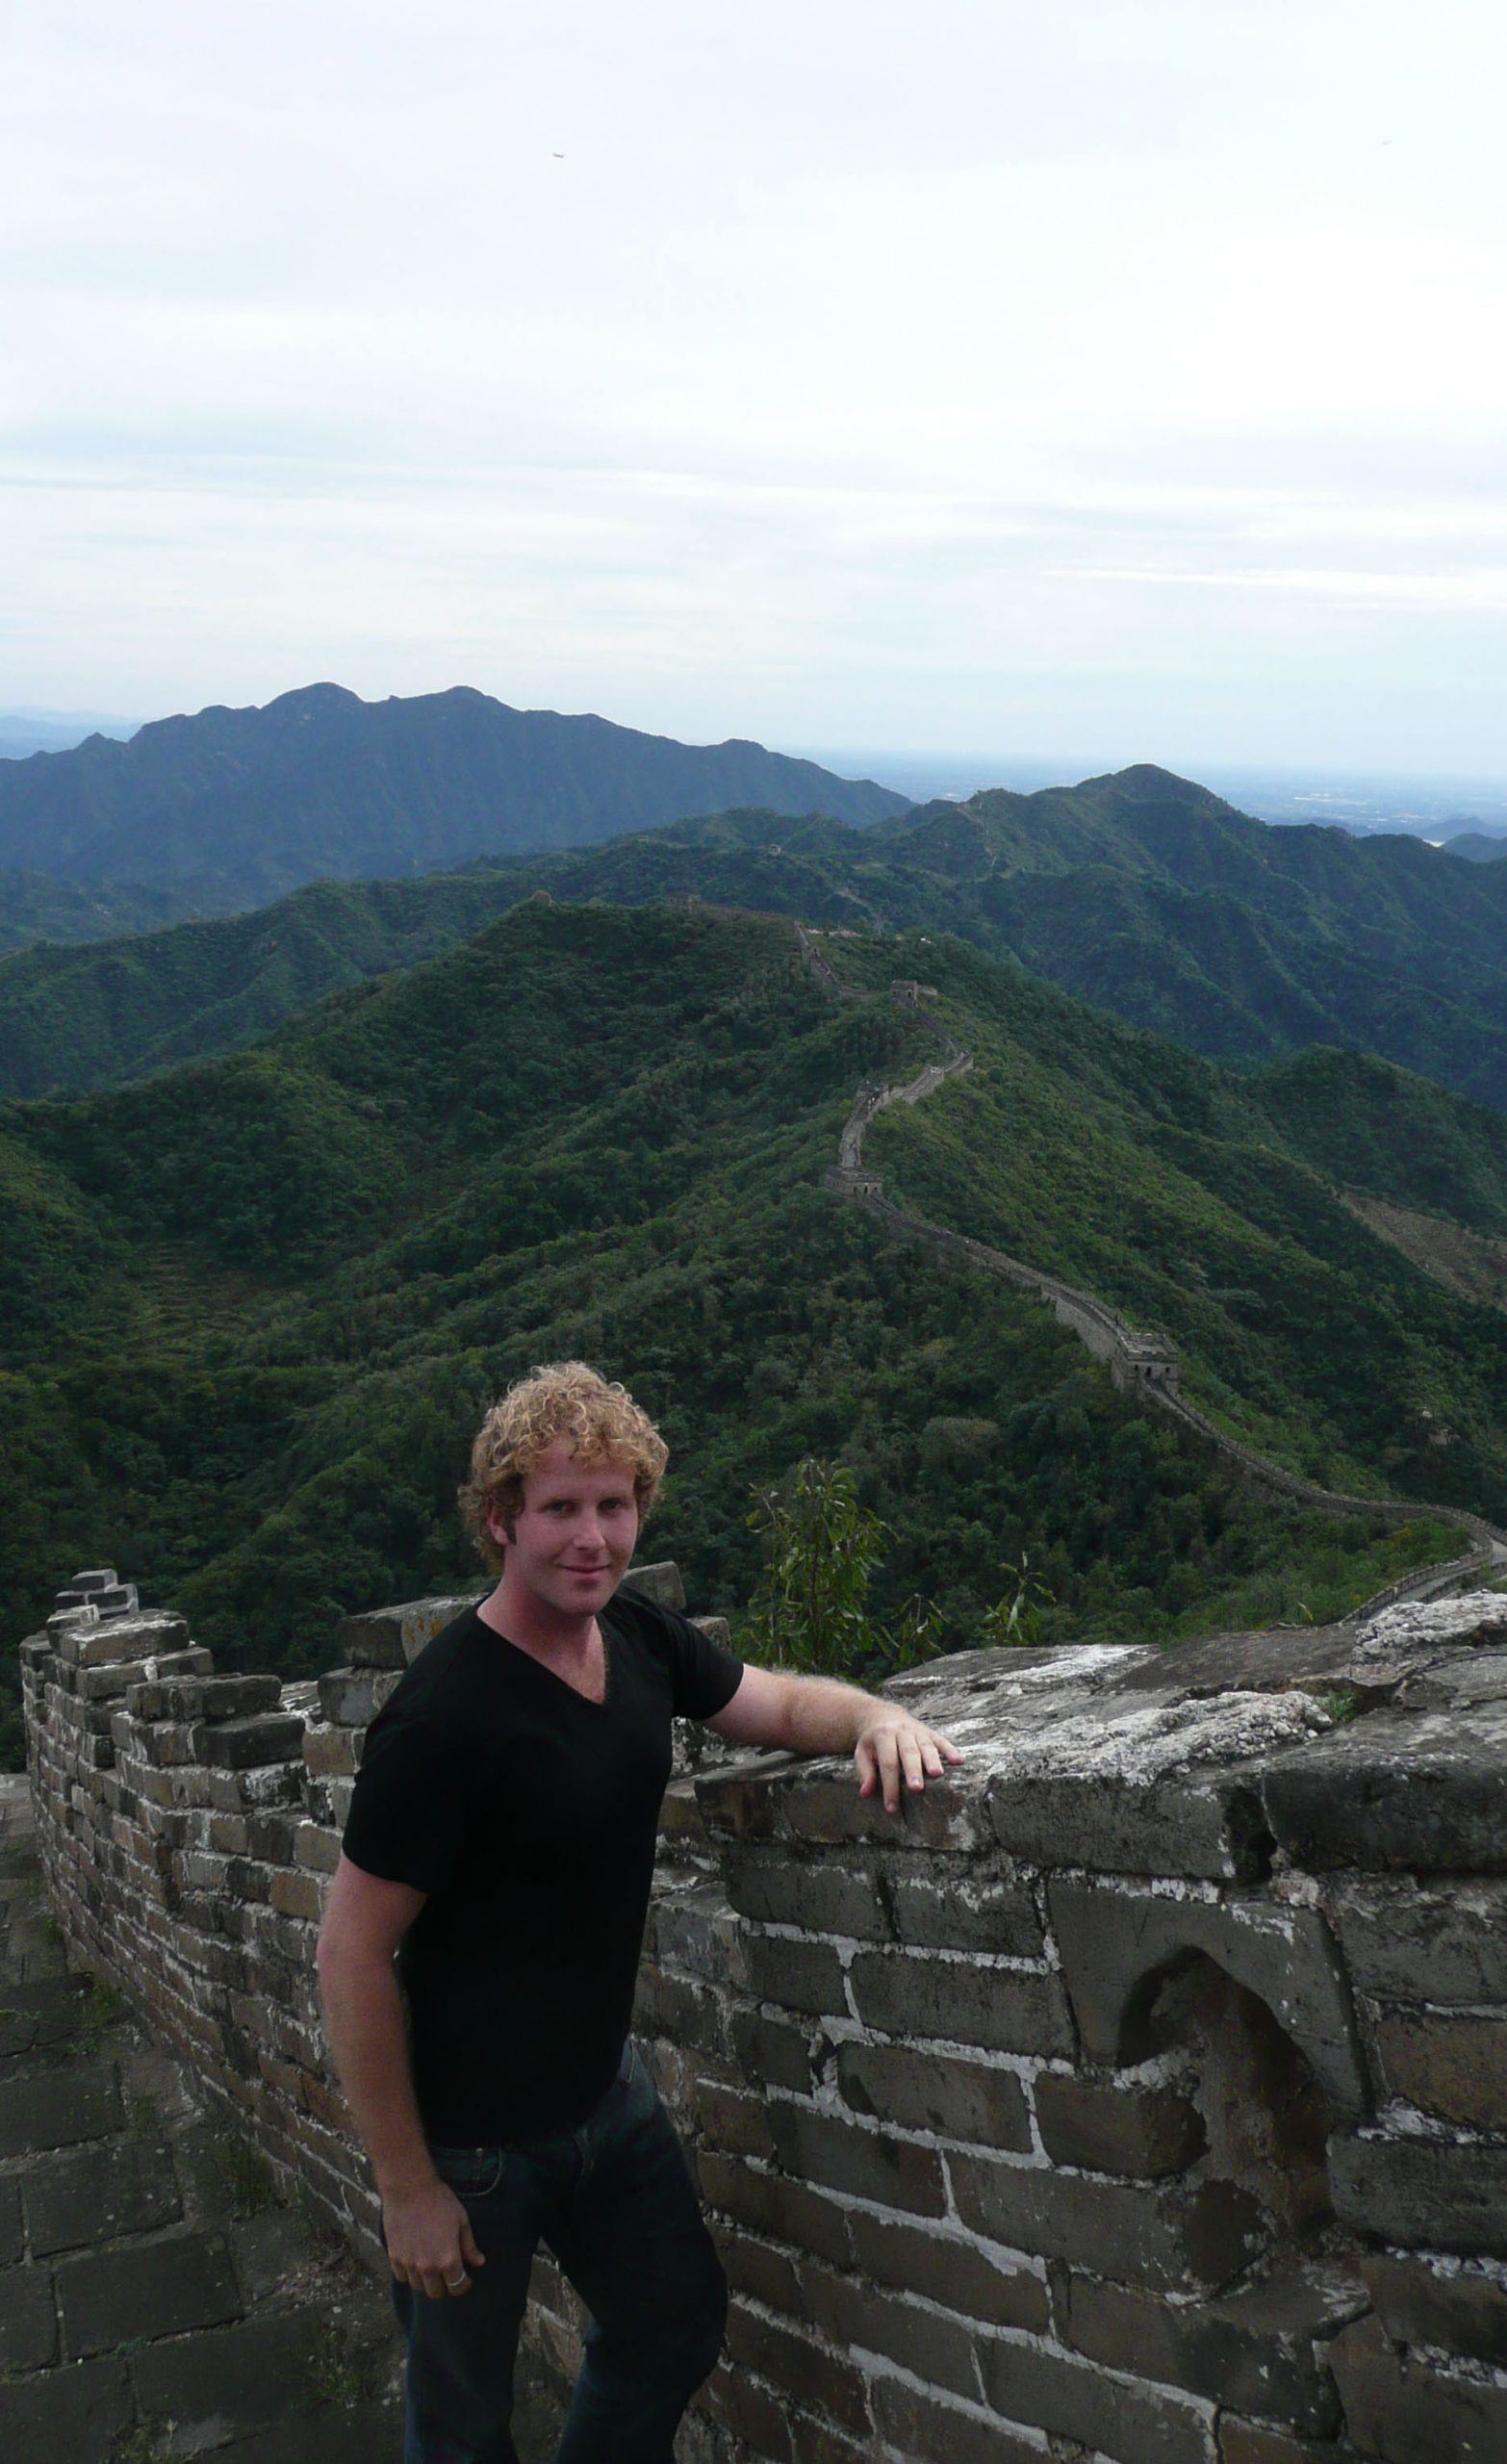 Ben on The Great Wall of China